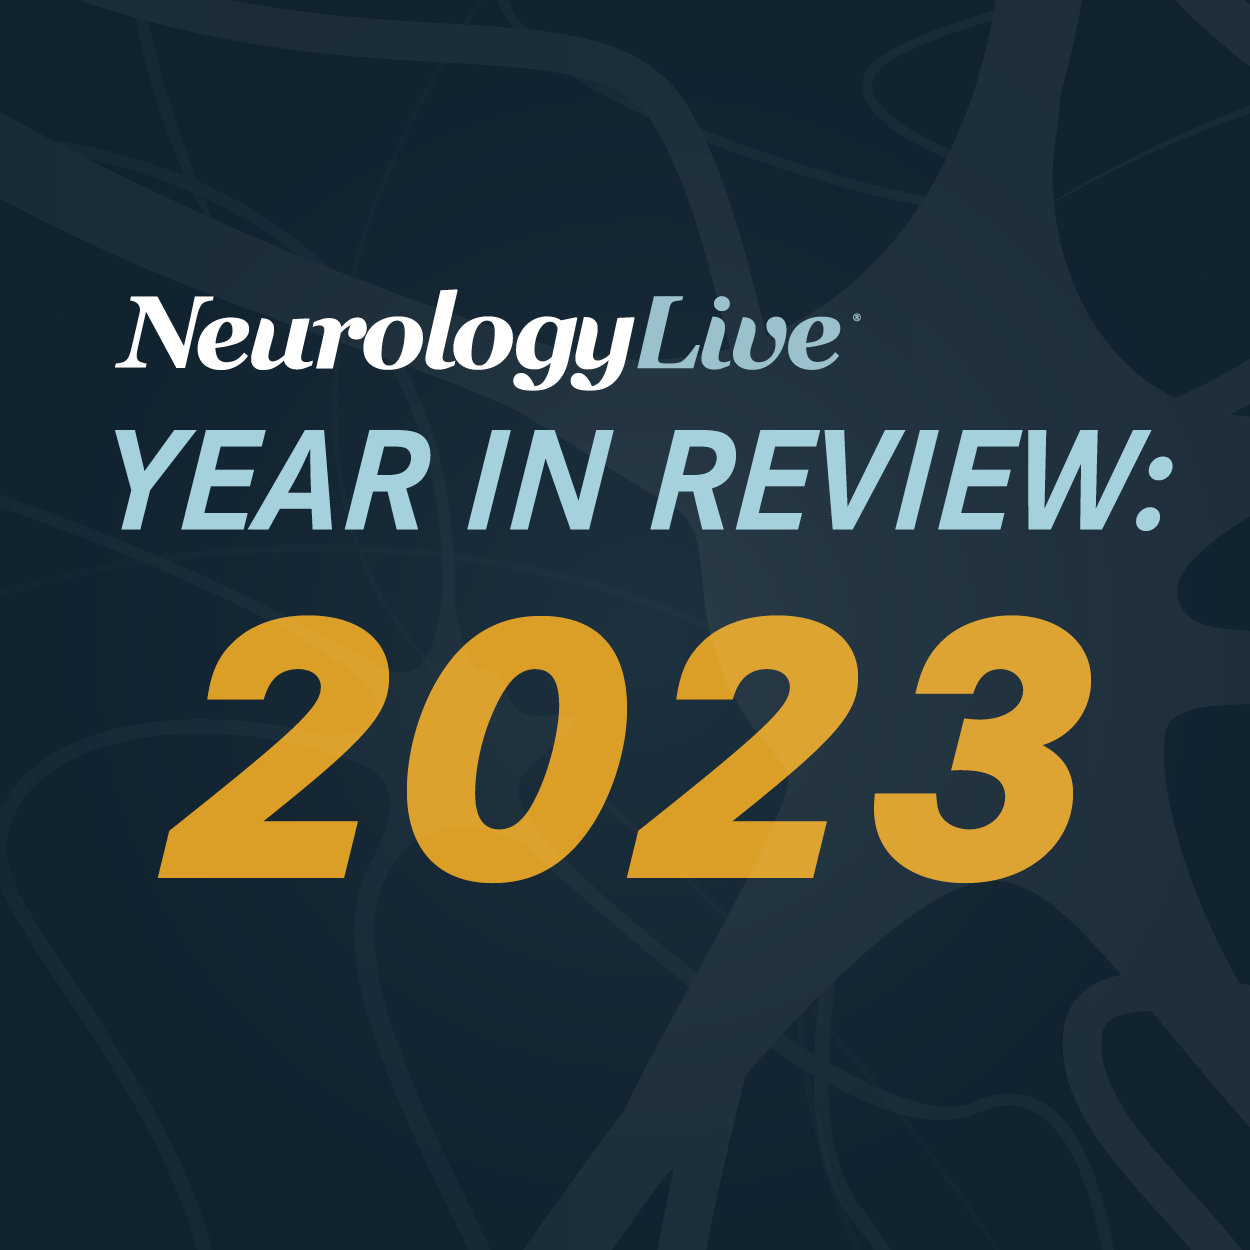 NeurologyLive® Year in Review 2023: Most-Read Features